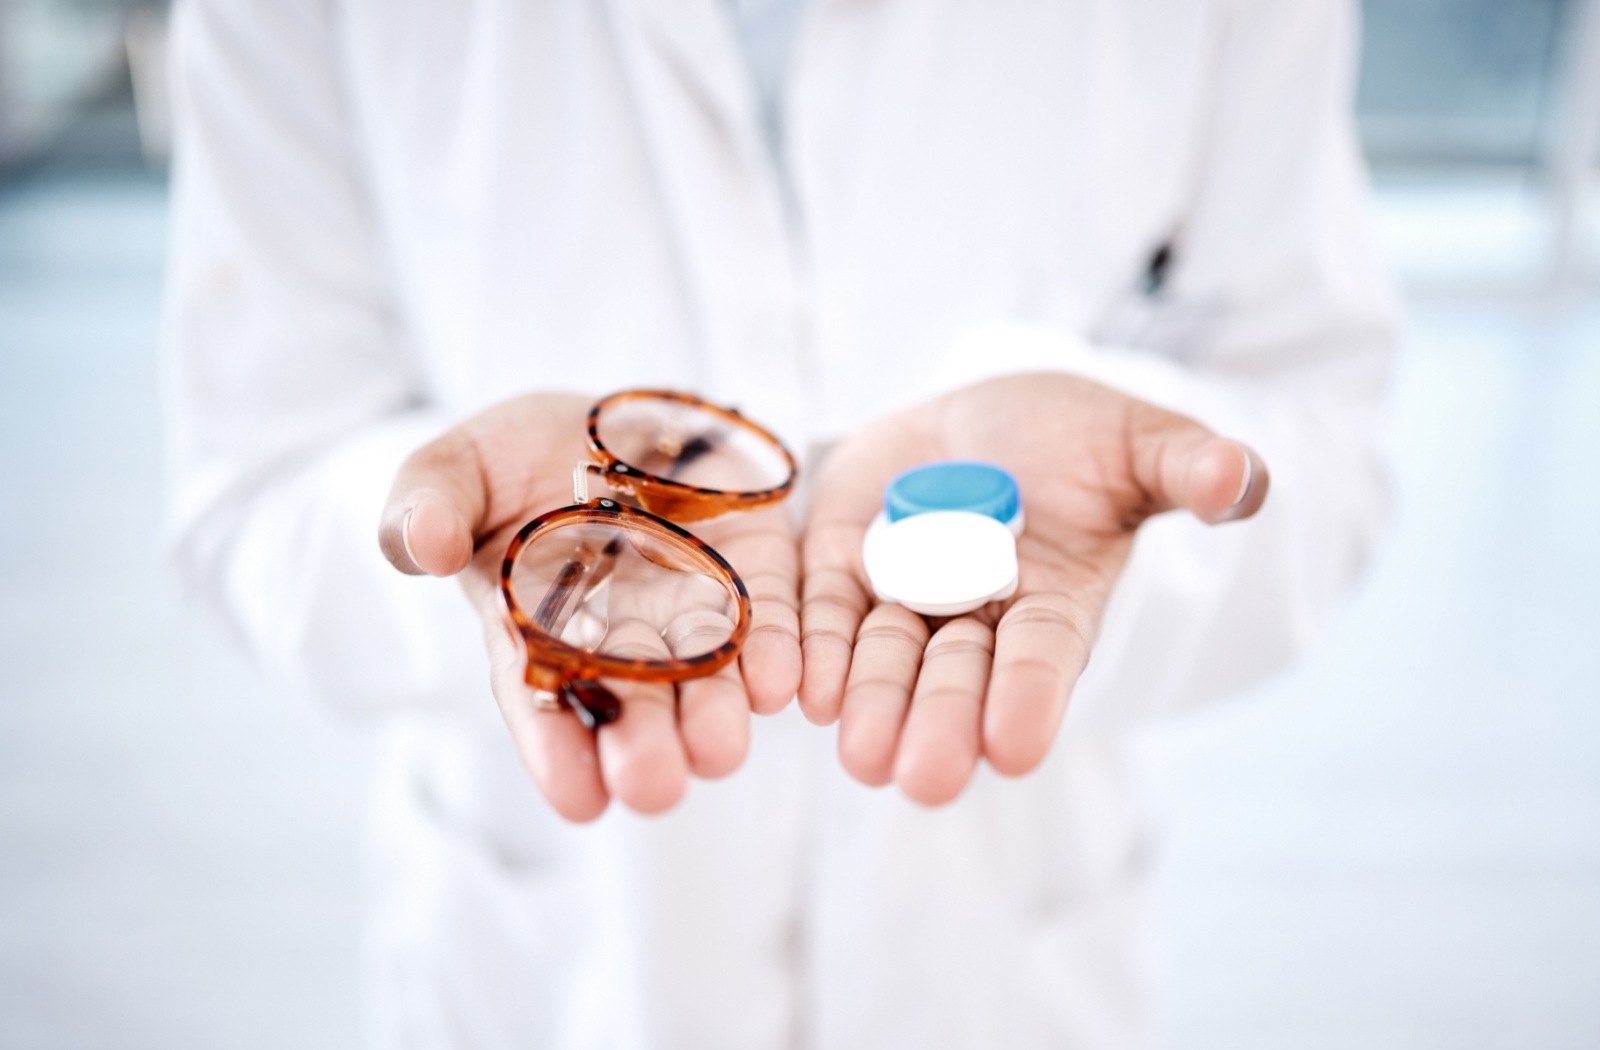 A close up of an eye doctor's hands holding a contact lens case in one and eyeglasses in the other.